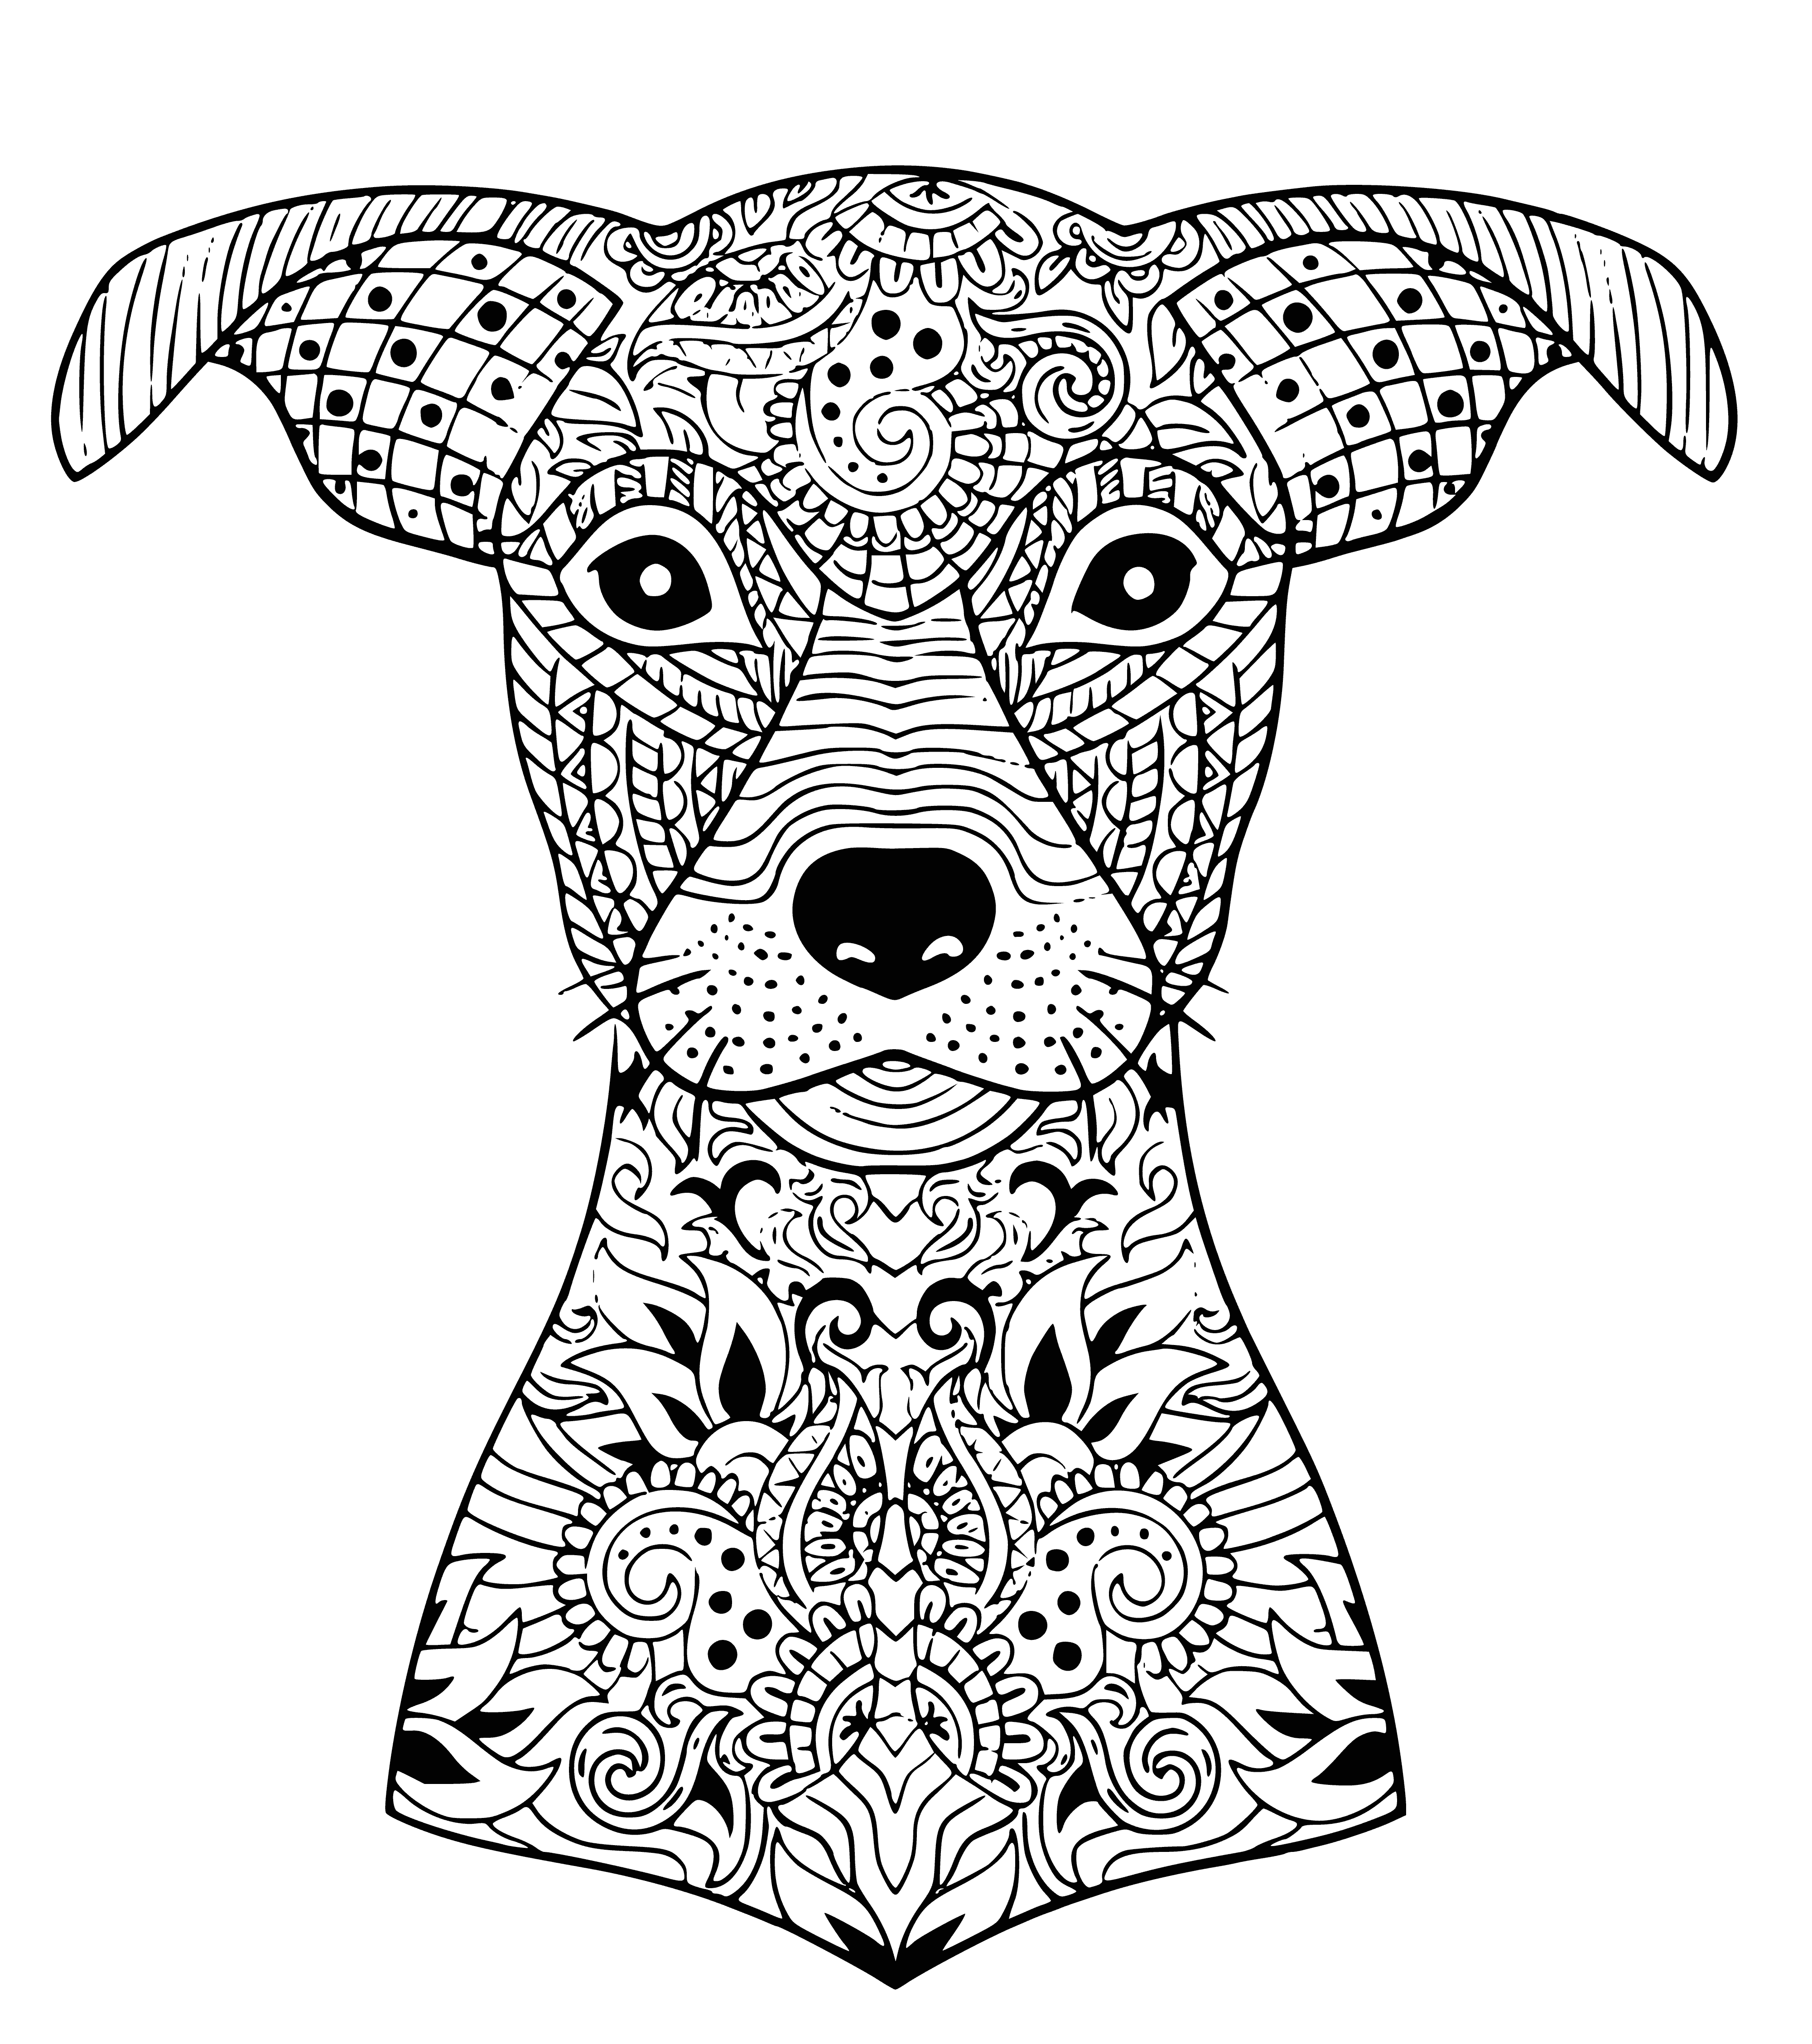 coloring page: A German Shepherd-like dog stands in the center of the page with its tongue out, brown and black fur, and bright green eyes. Behind it is a large tree, and in the background is a blue sky with white clouds.